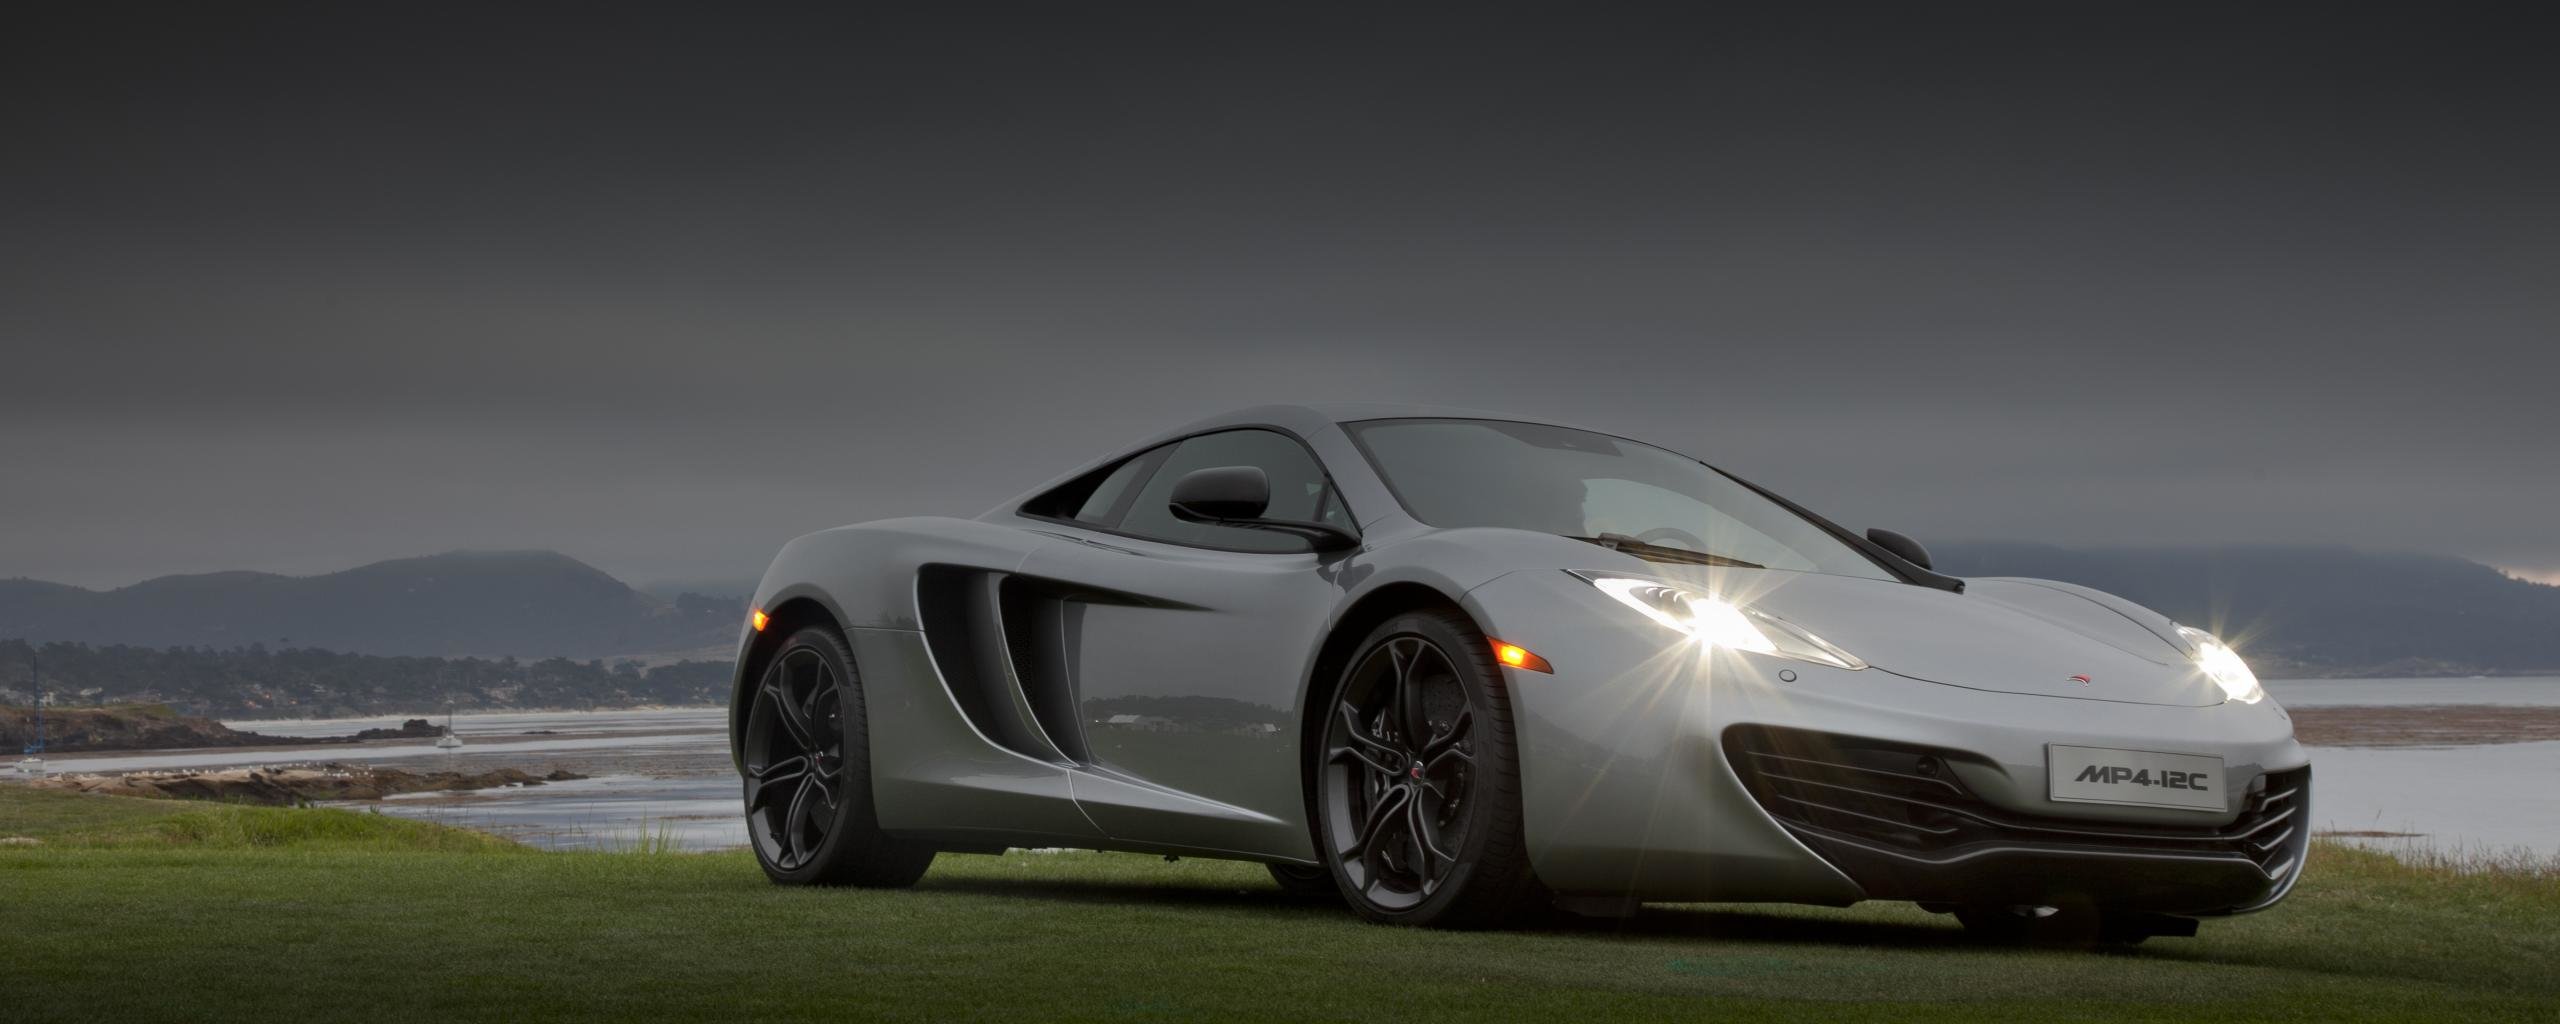 Download dual monitor 2569x1024 McLaren MP4-12C PC background ID:298499 for free